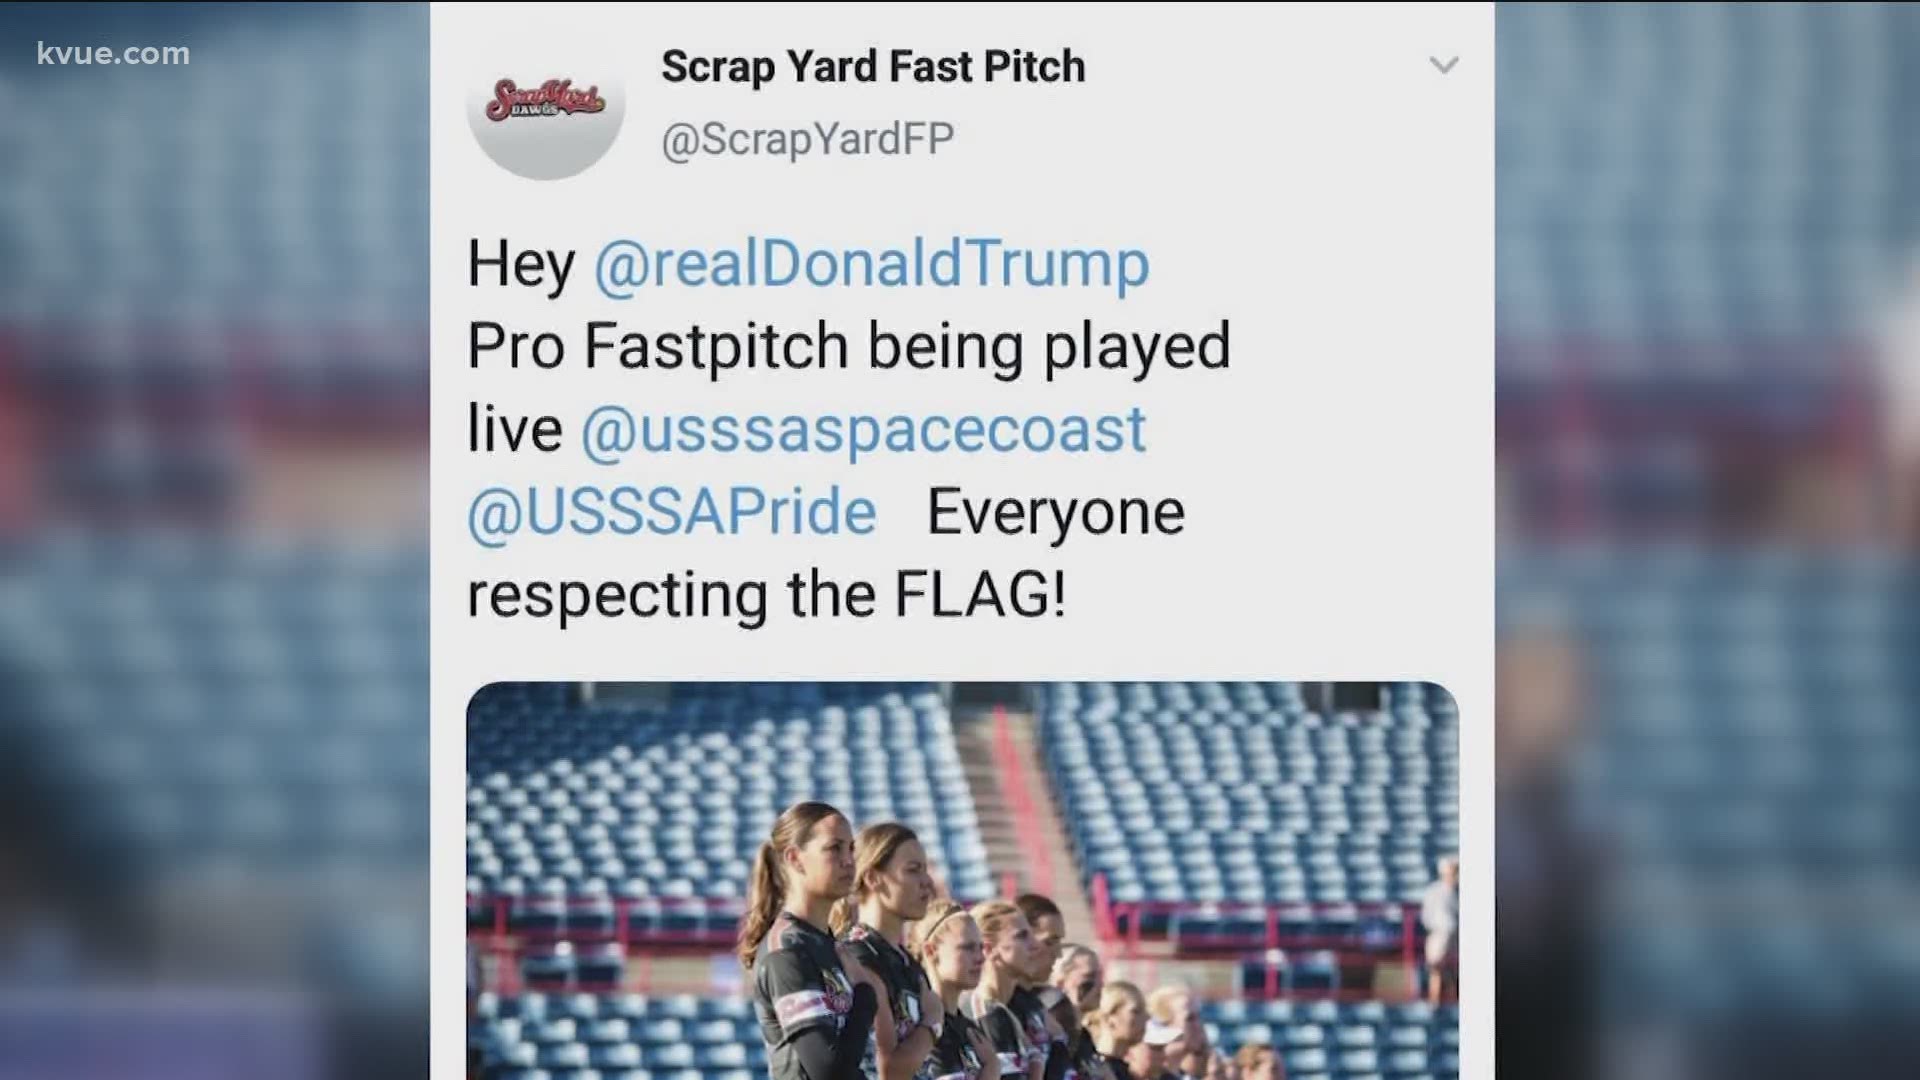 Cat Osterman and several other softball players are upset about a tweet sent out by the Scrap Yard Fast Pitch account.